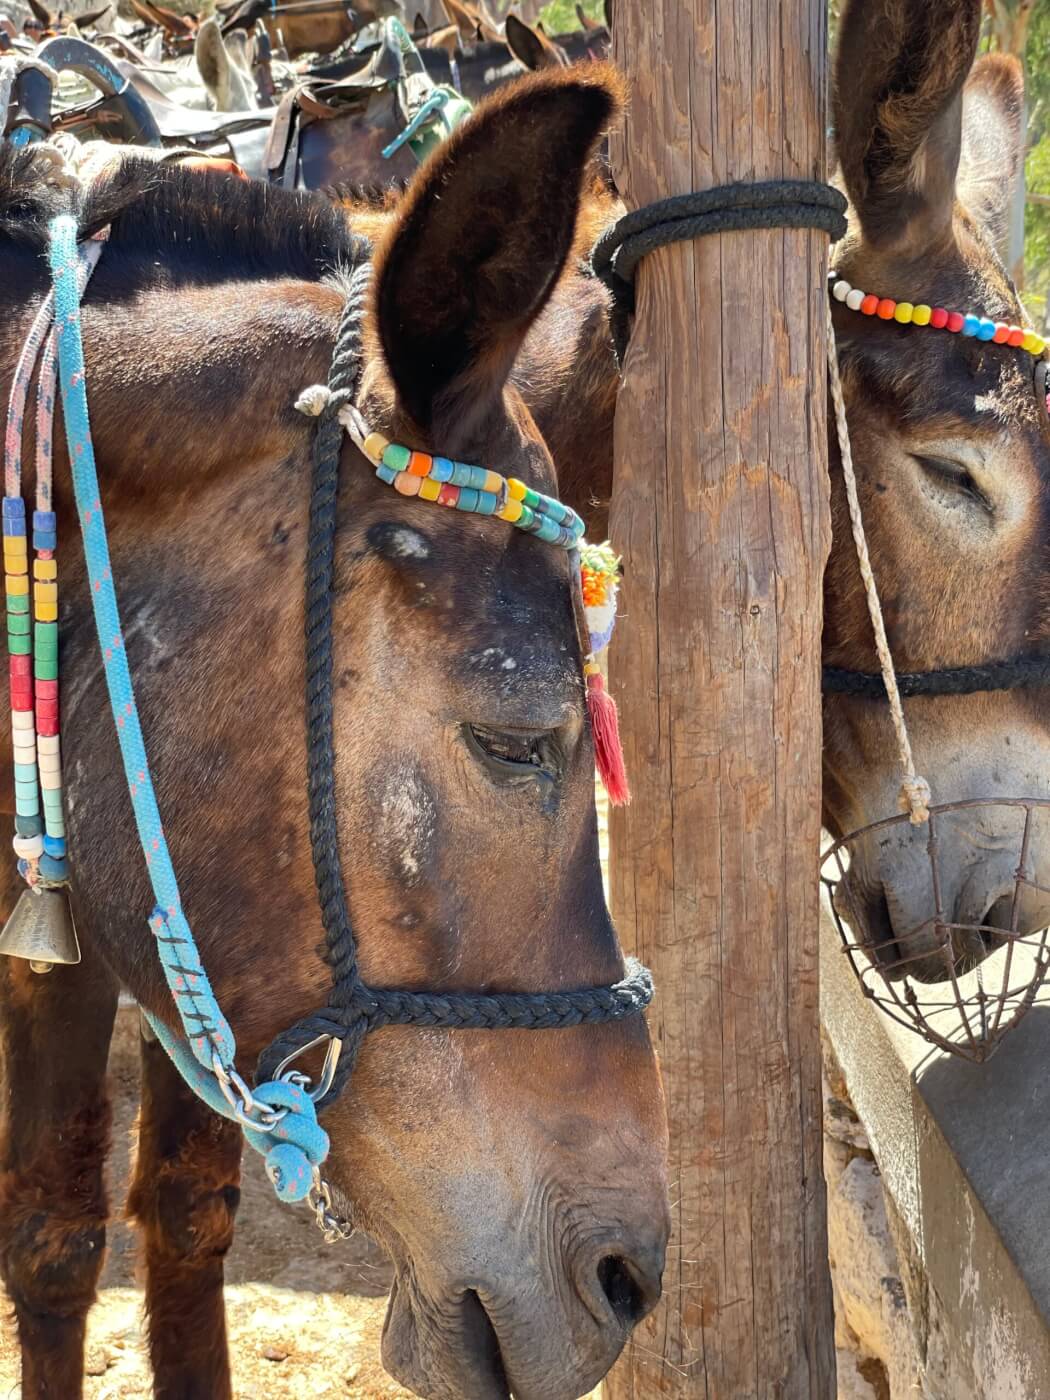 New Footage From Santorini: Donkeys and Mules Are Still Being Abused!